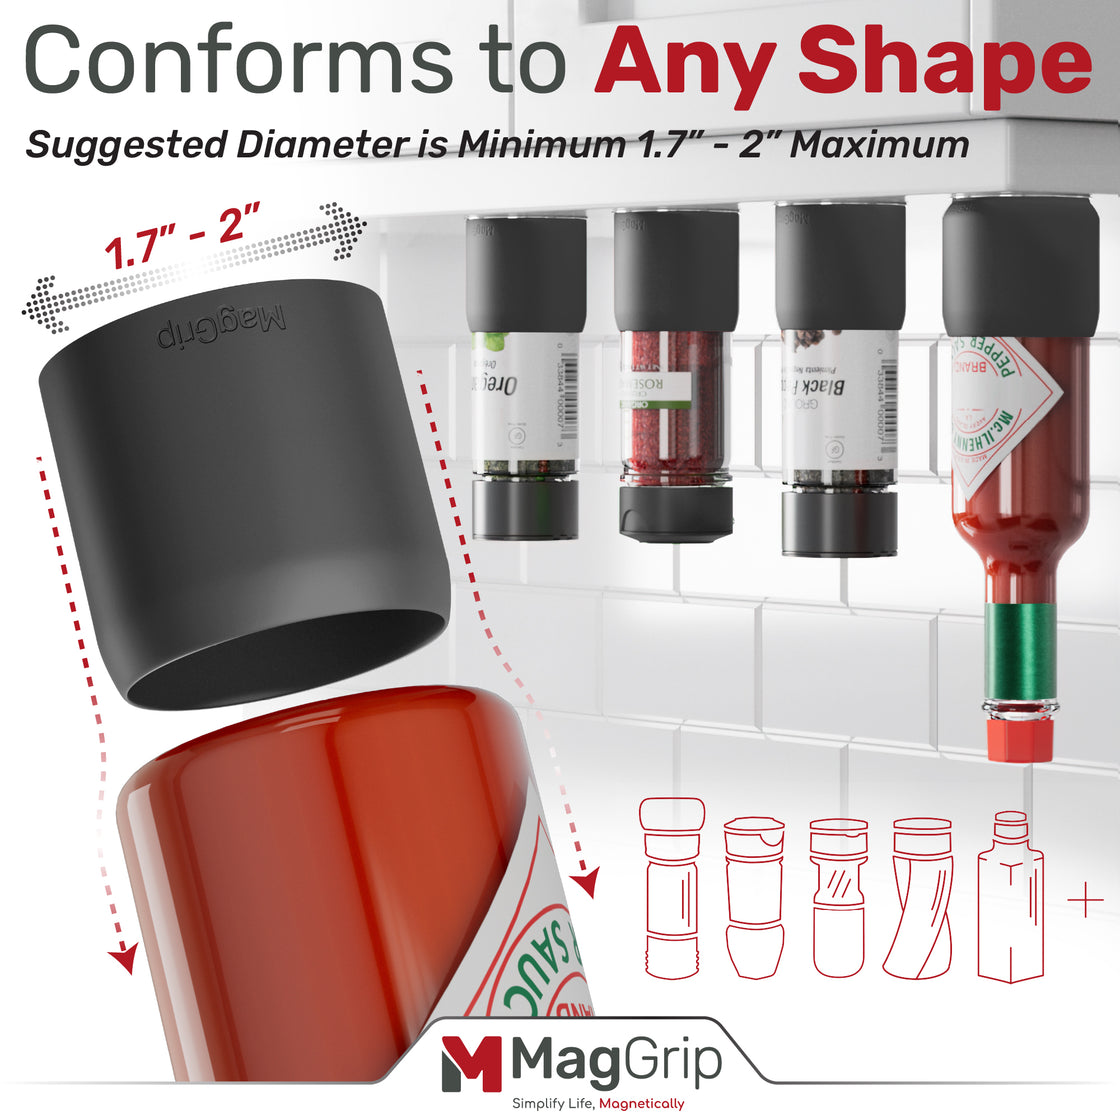 MagGrip Magnetic Silicone Spice Jar Grips - Black